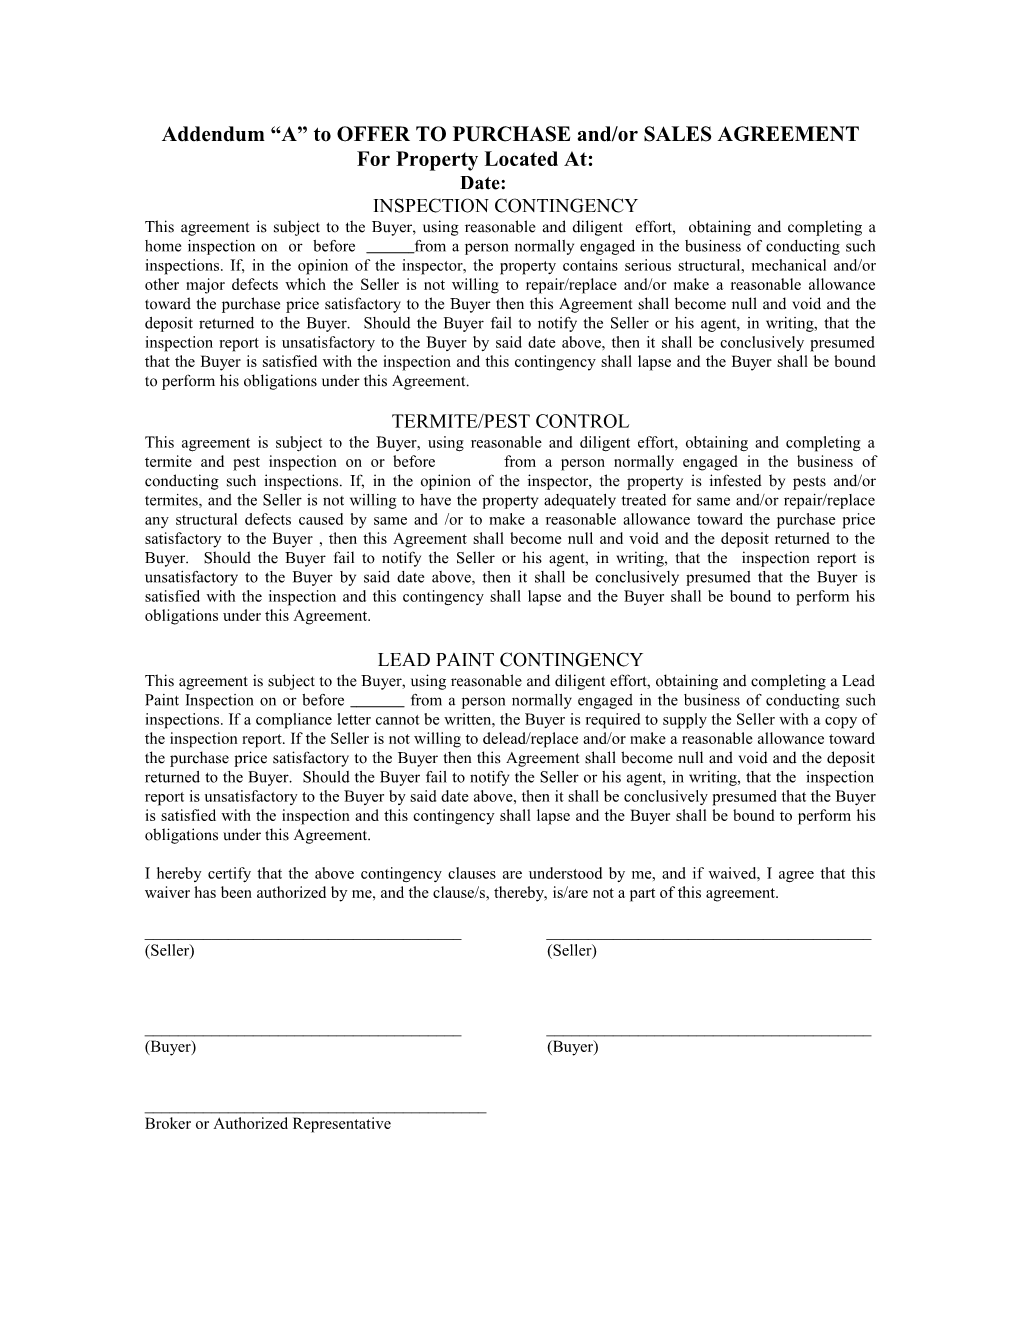 Addendum a to OFFER to PURCHASE And/Or SALES AGREEMENT